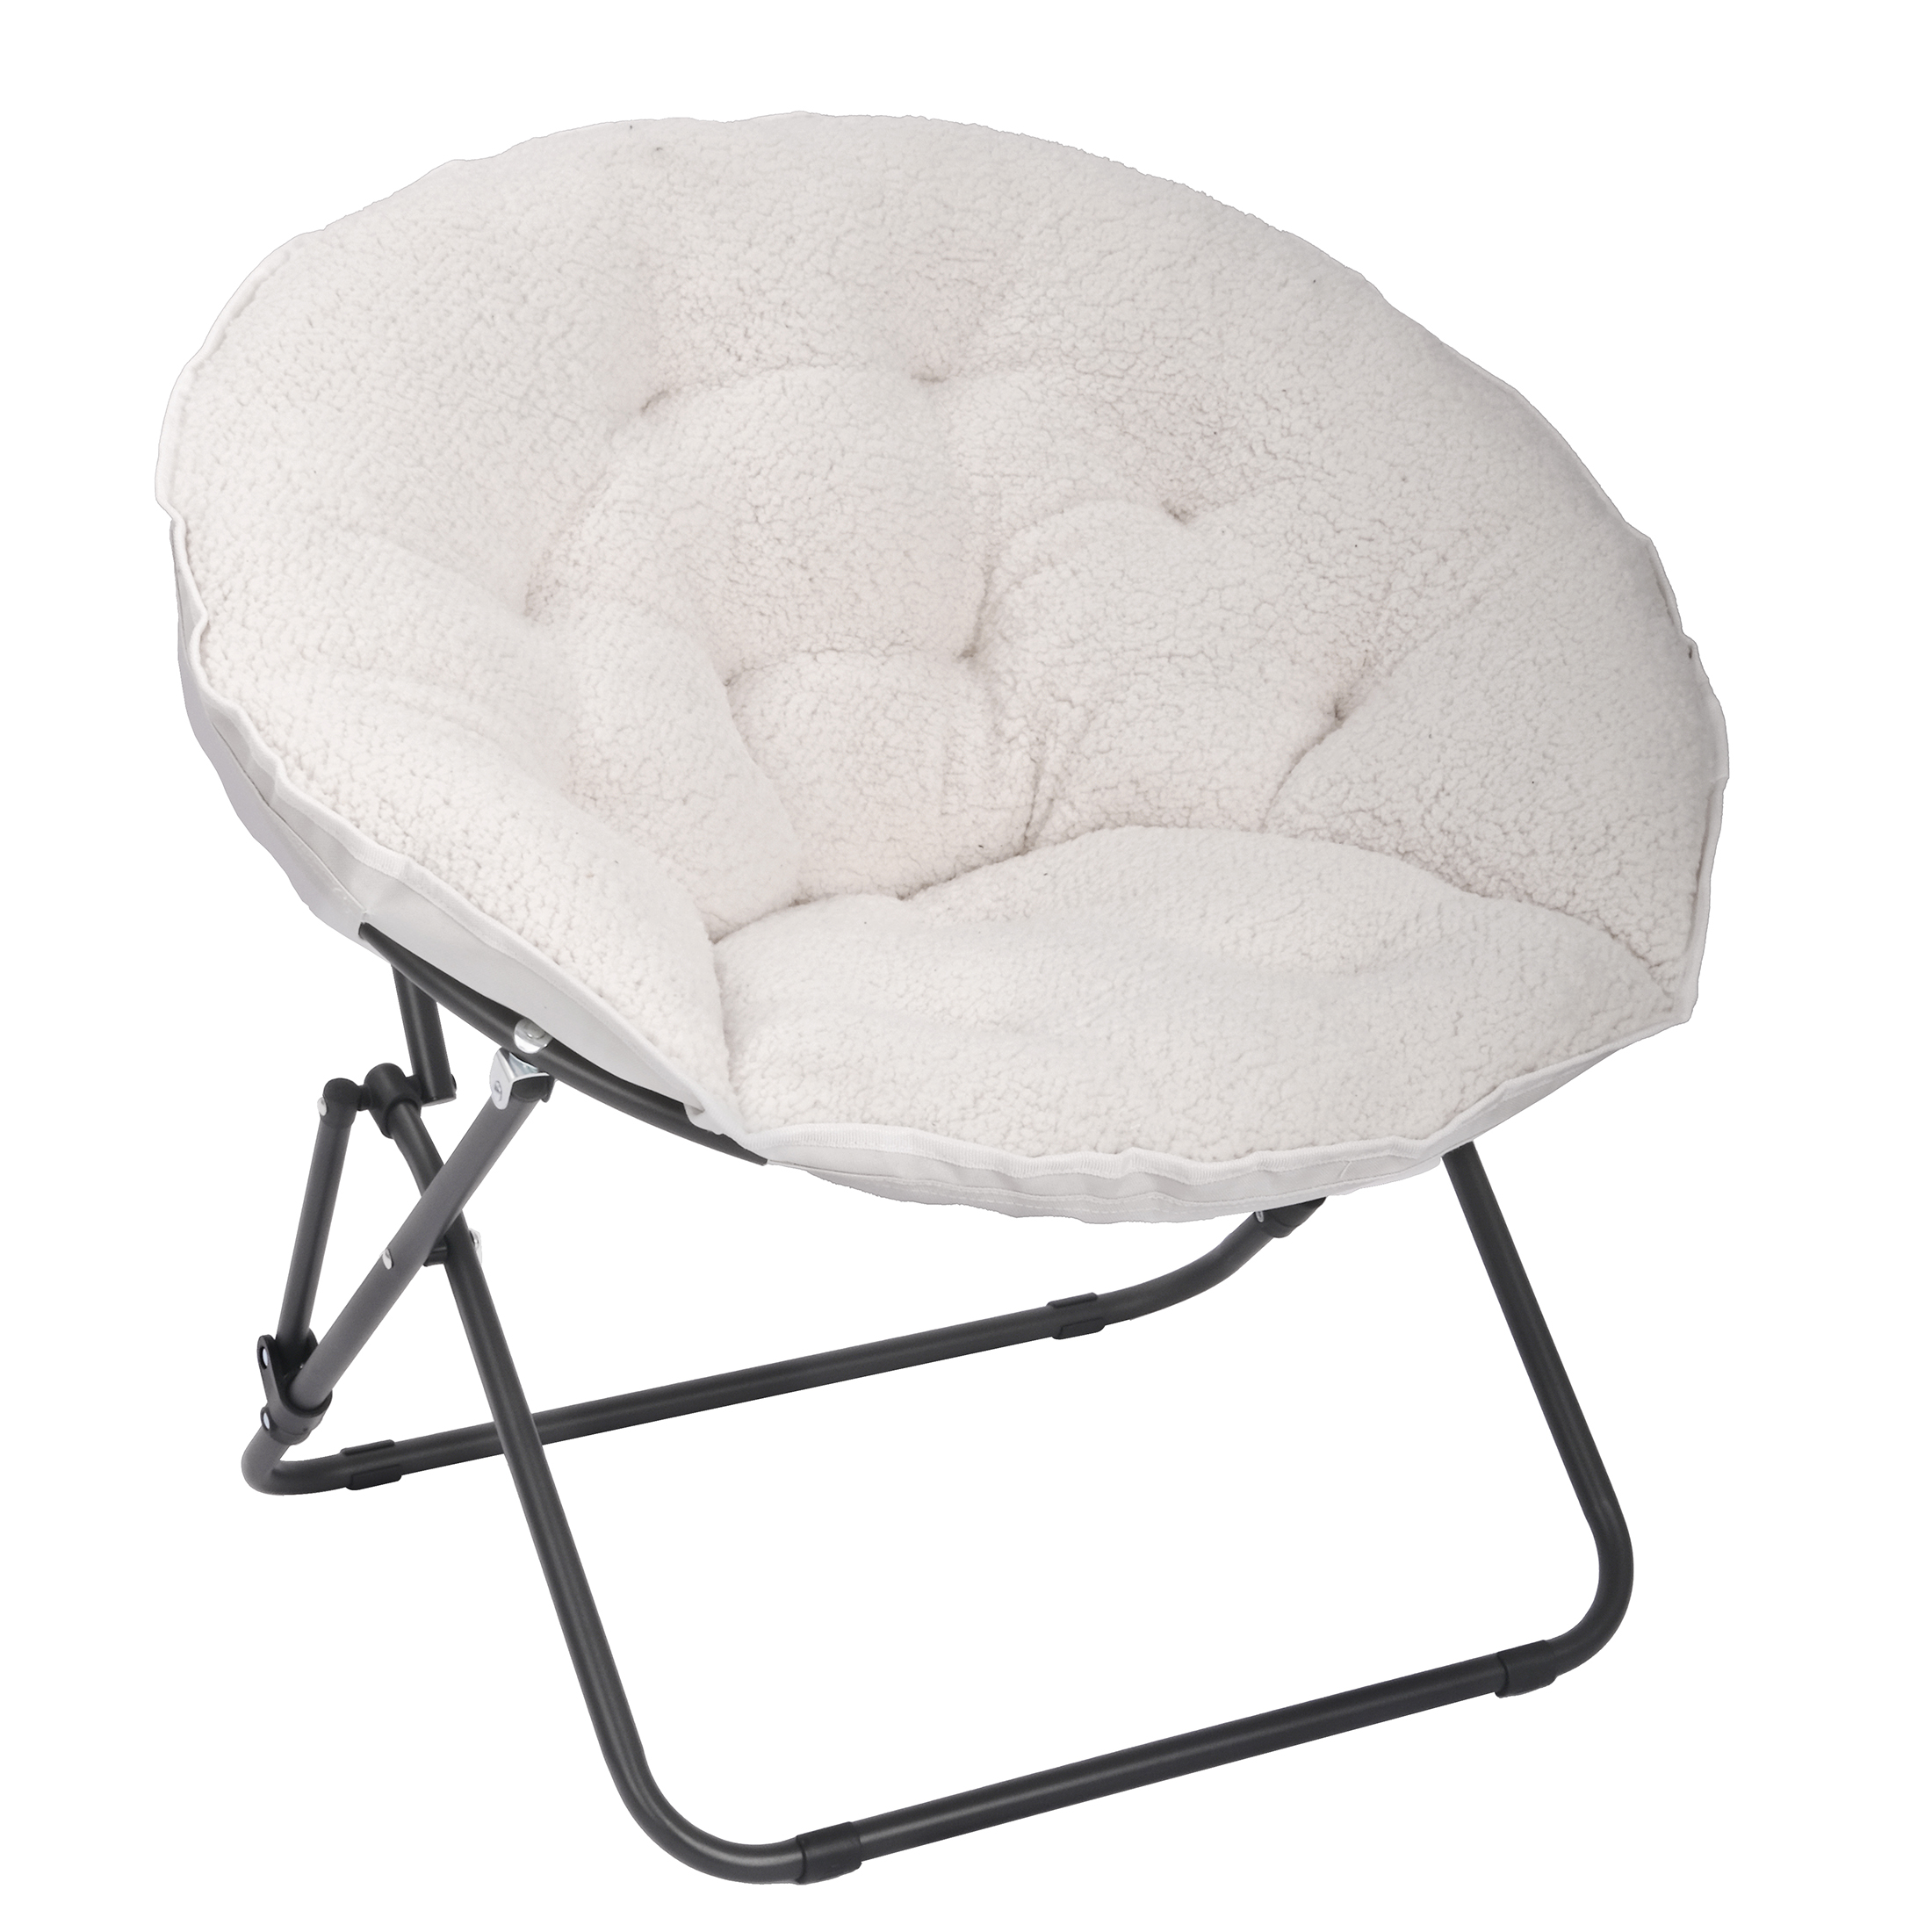 Mainstays Saucer Chair for Kids and Teens, White Faux Shearling - image 5 of 7